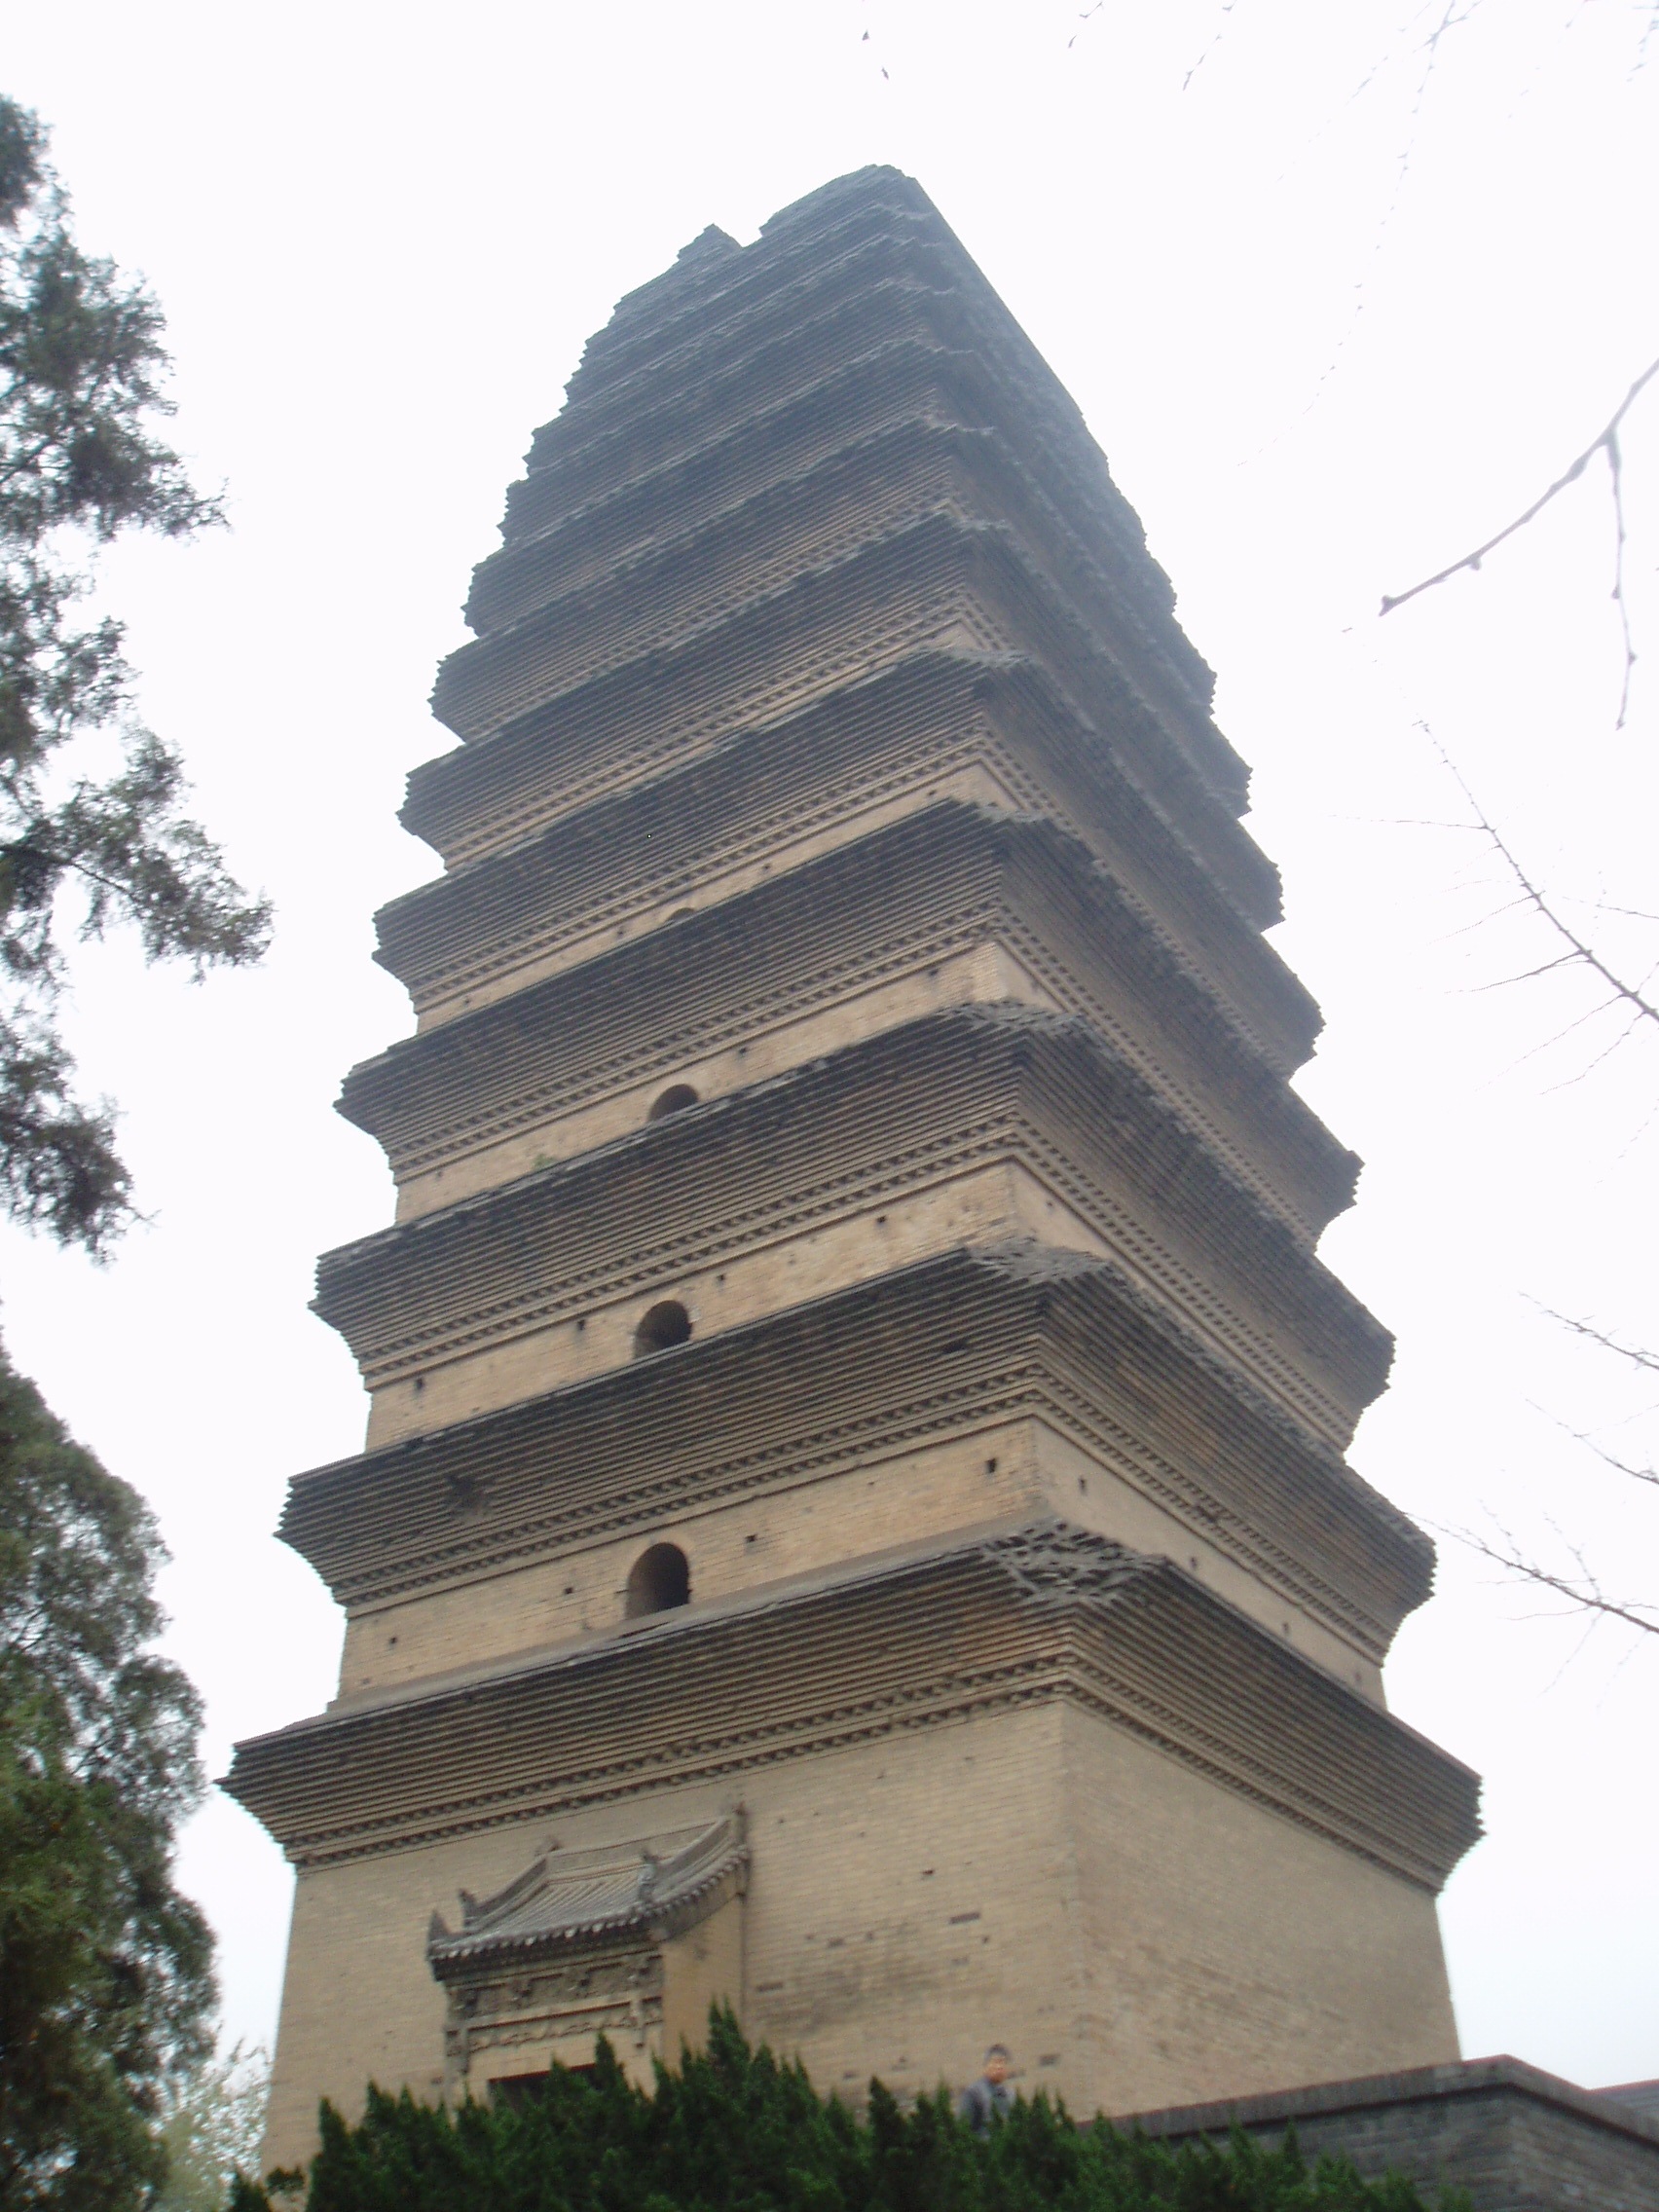 Small Wild Goose Pagoda, Xi'an The Small Wild Goose Pagoda in Xi'an is one of the city's more ancient Tang Dynasty monuments, dating from 709, the tower was built to house Buddhist scriptures brought back from India. It was damaged by several earthquakes in the medieval period, one of which caused a large fissure to open through it's centre, another later caused it to close again! There are several buildings surviving in the complex from the ancient temple that stood here, along with many animal sculptures. www.travelchinaguide.com/attraction/shaanxi/xian/small_go...